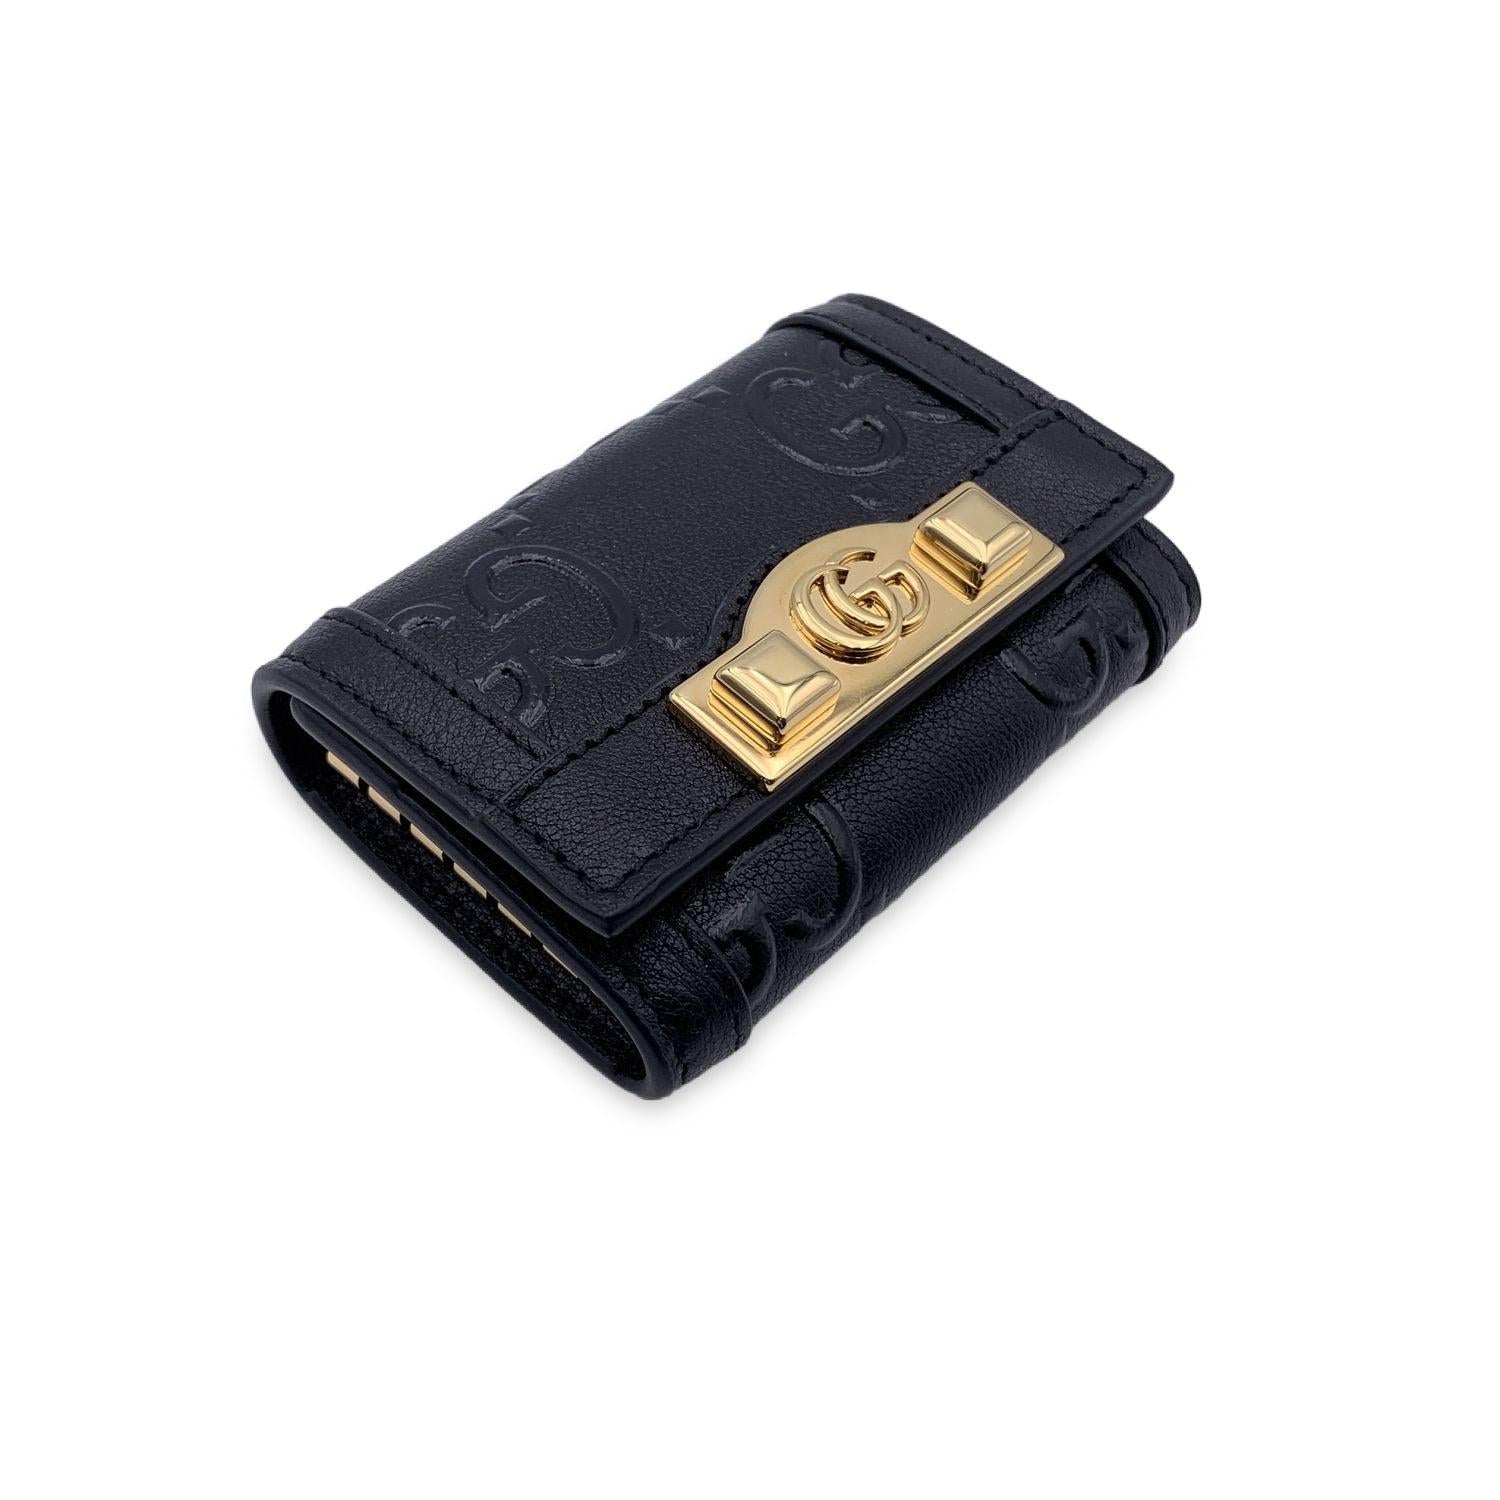 Gucci Black Monogram Leather Wonka 6 Key Holder Case Pouch In Excellent Condition For Sale In Rome, Rome